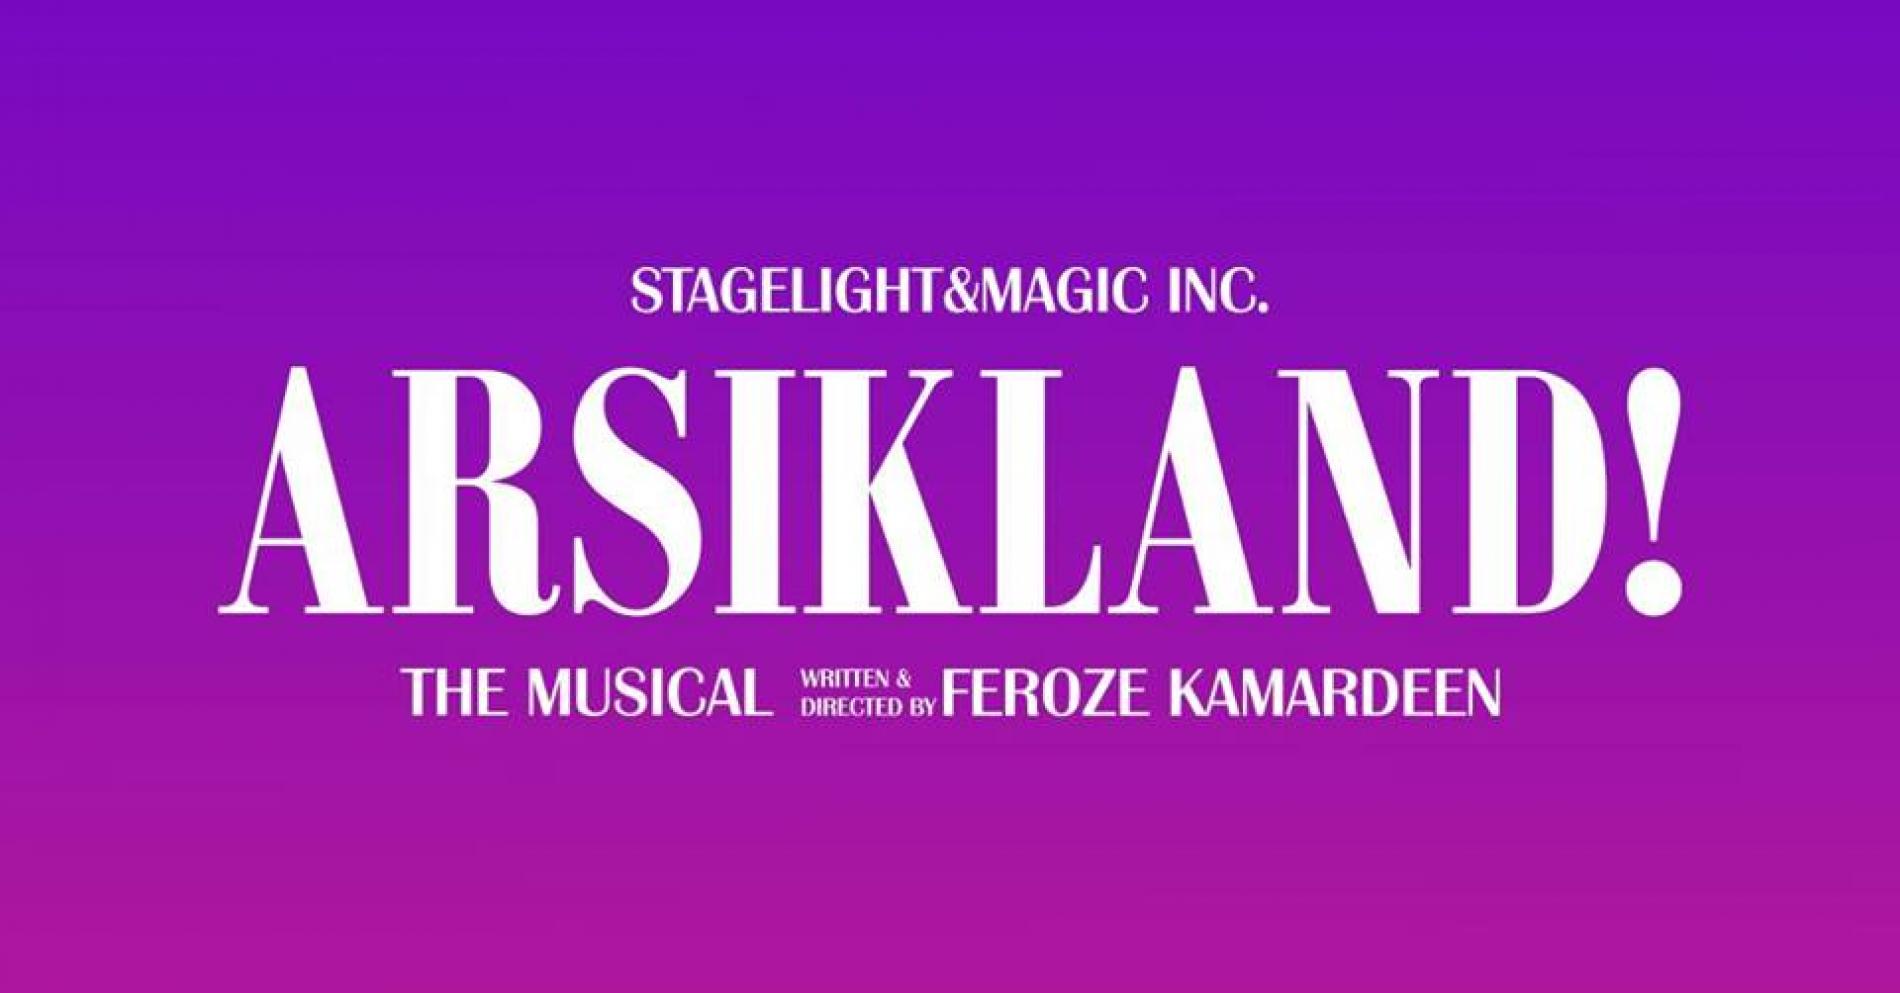 Arsikland! The Musical